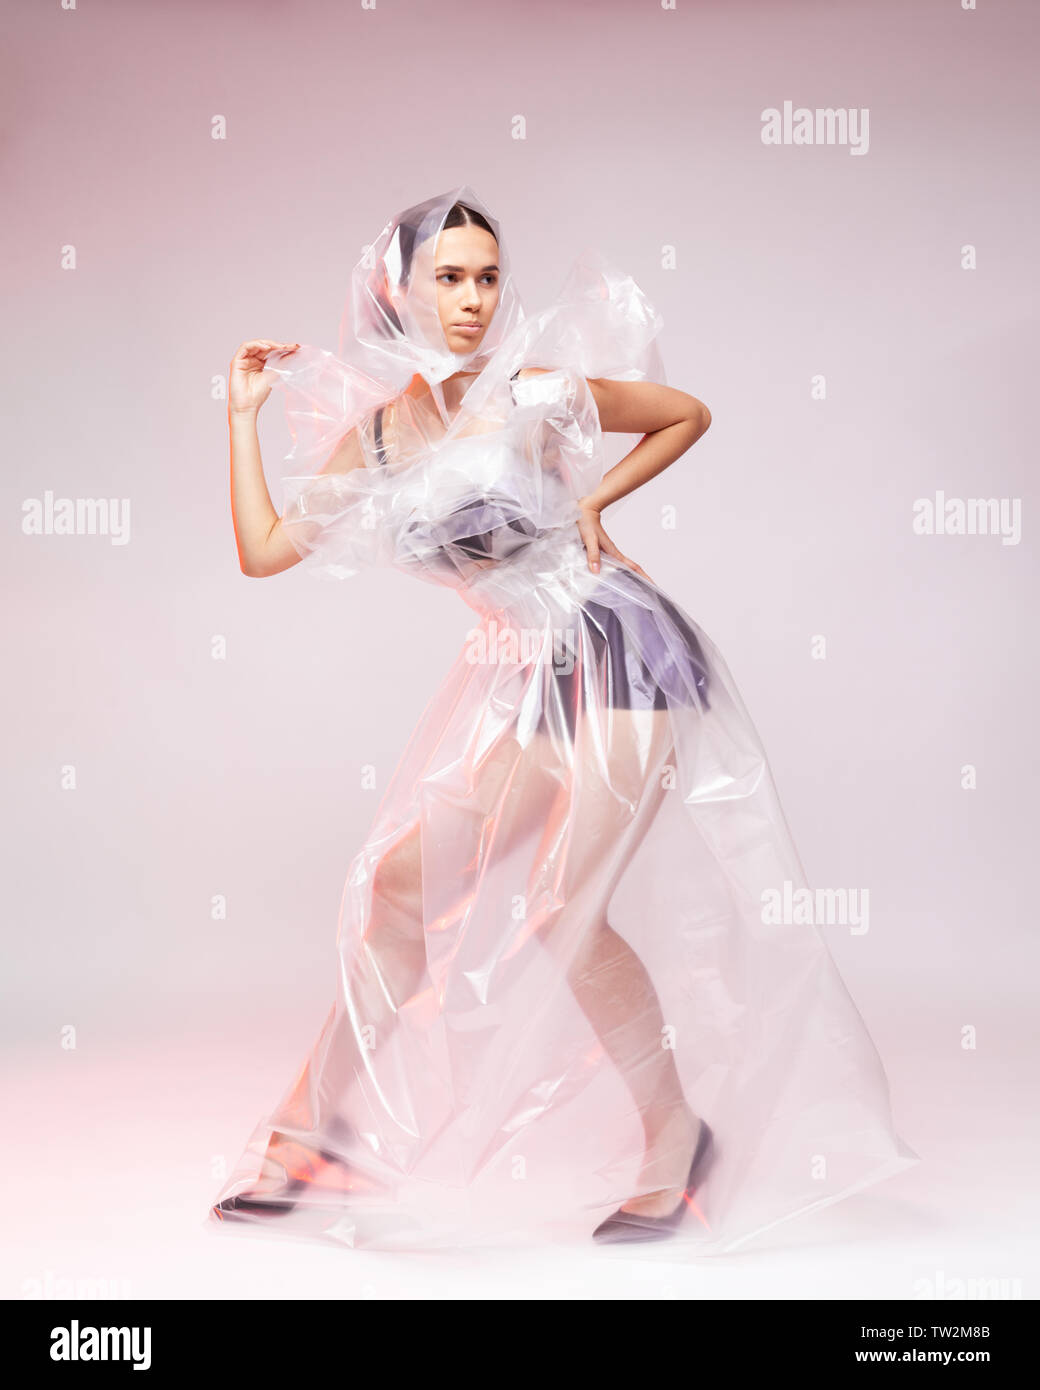 Girl posing in a dress made of plastic film. Fashion portrait. The concept of using artificial materials in clothing, environmental pollution with pol Stock Photo